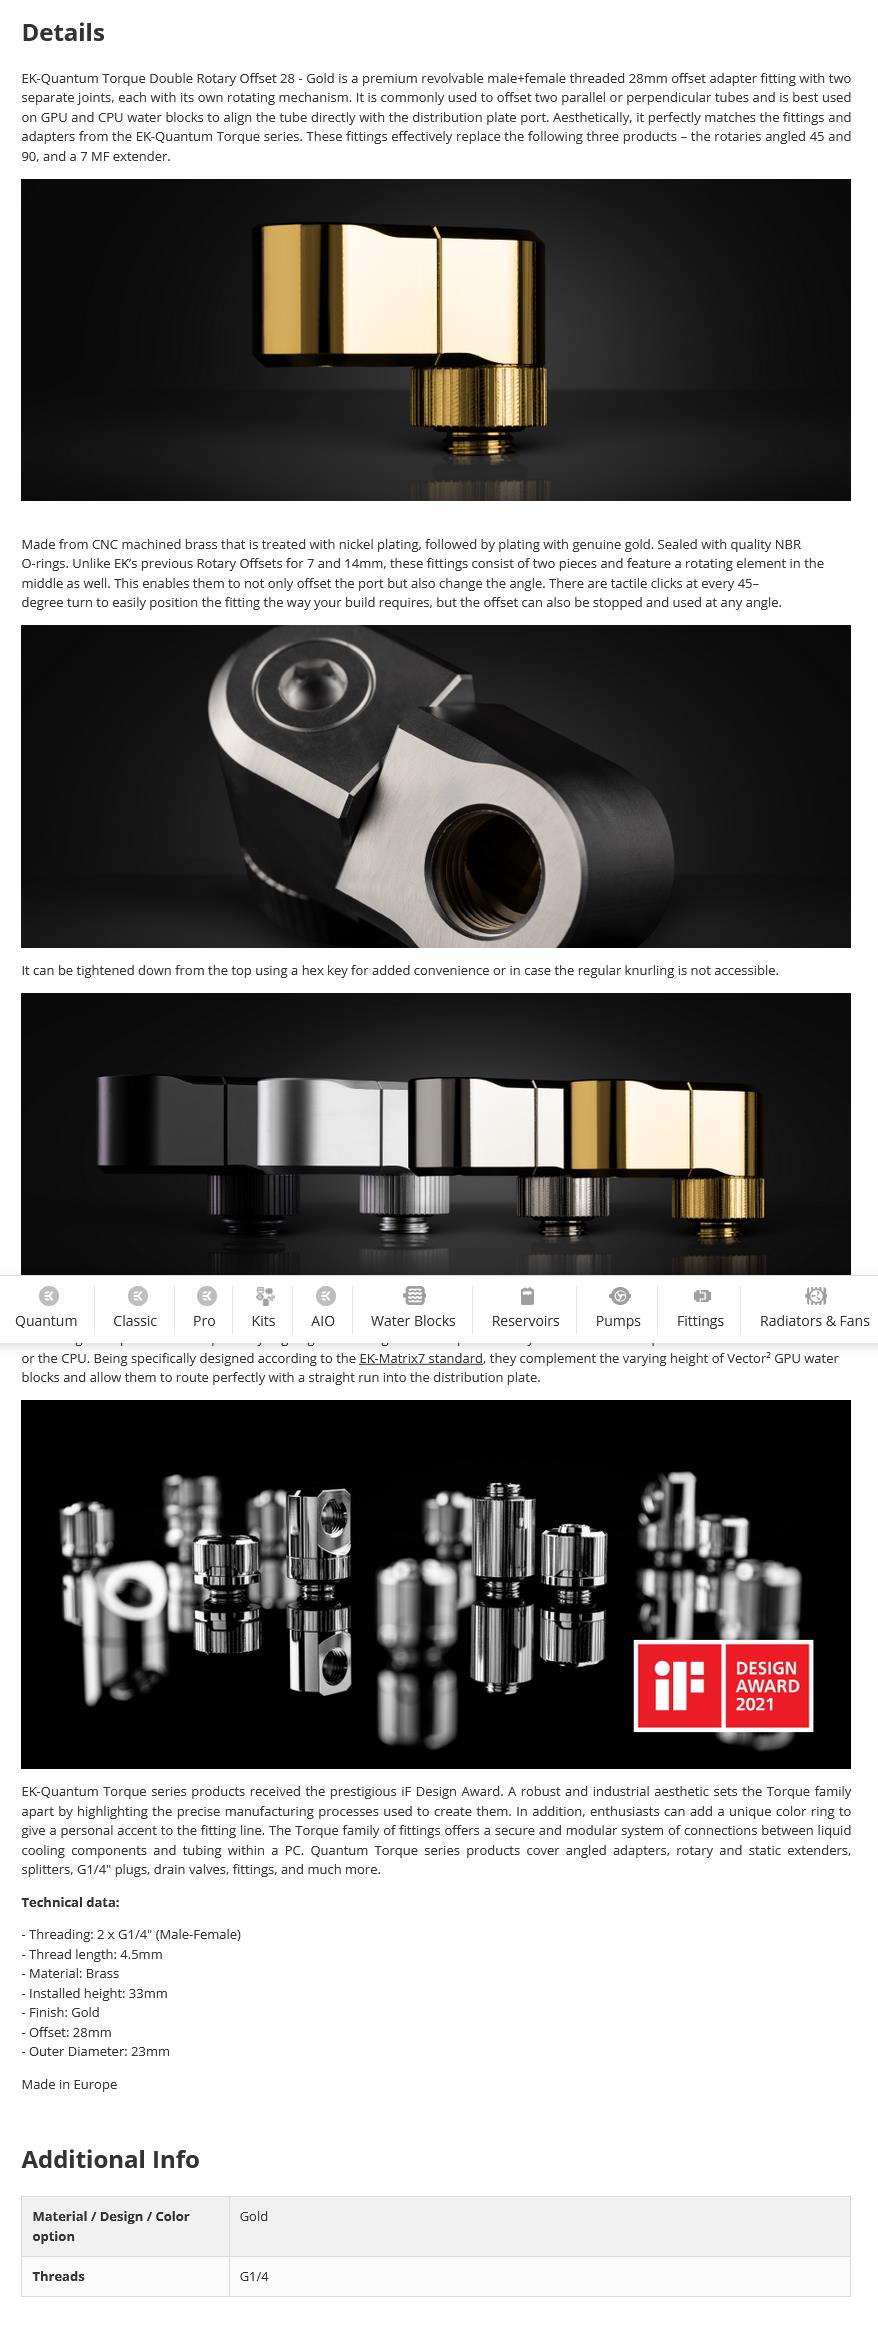 A large marketing image providing additional information about the product EK-Quantum Torque Double Rotary Offset 28 - Gold - Additional alt info not provided